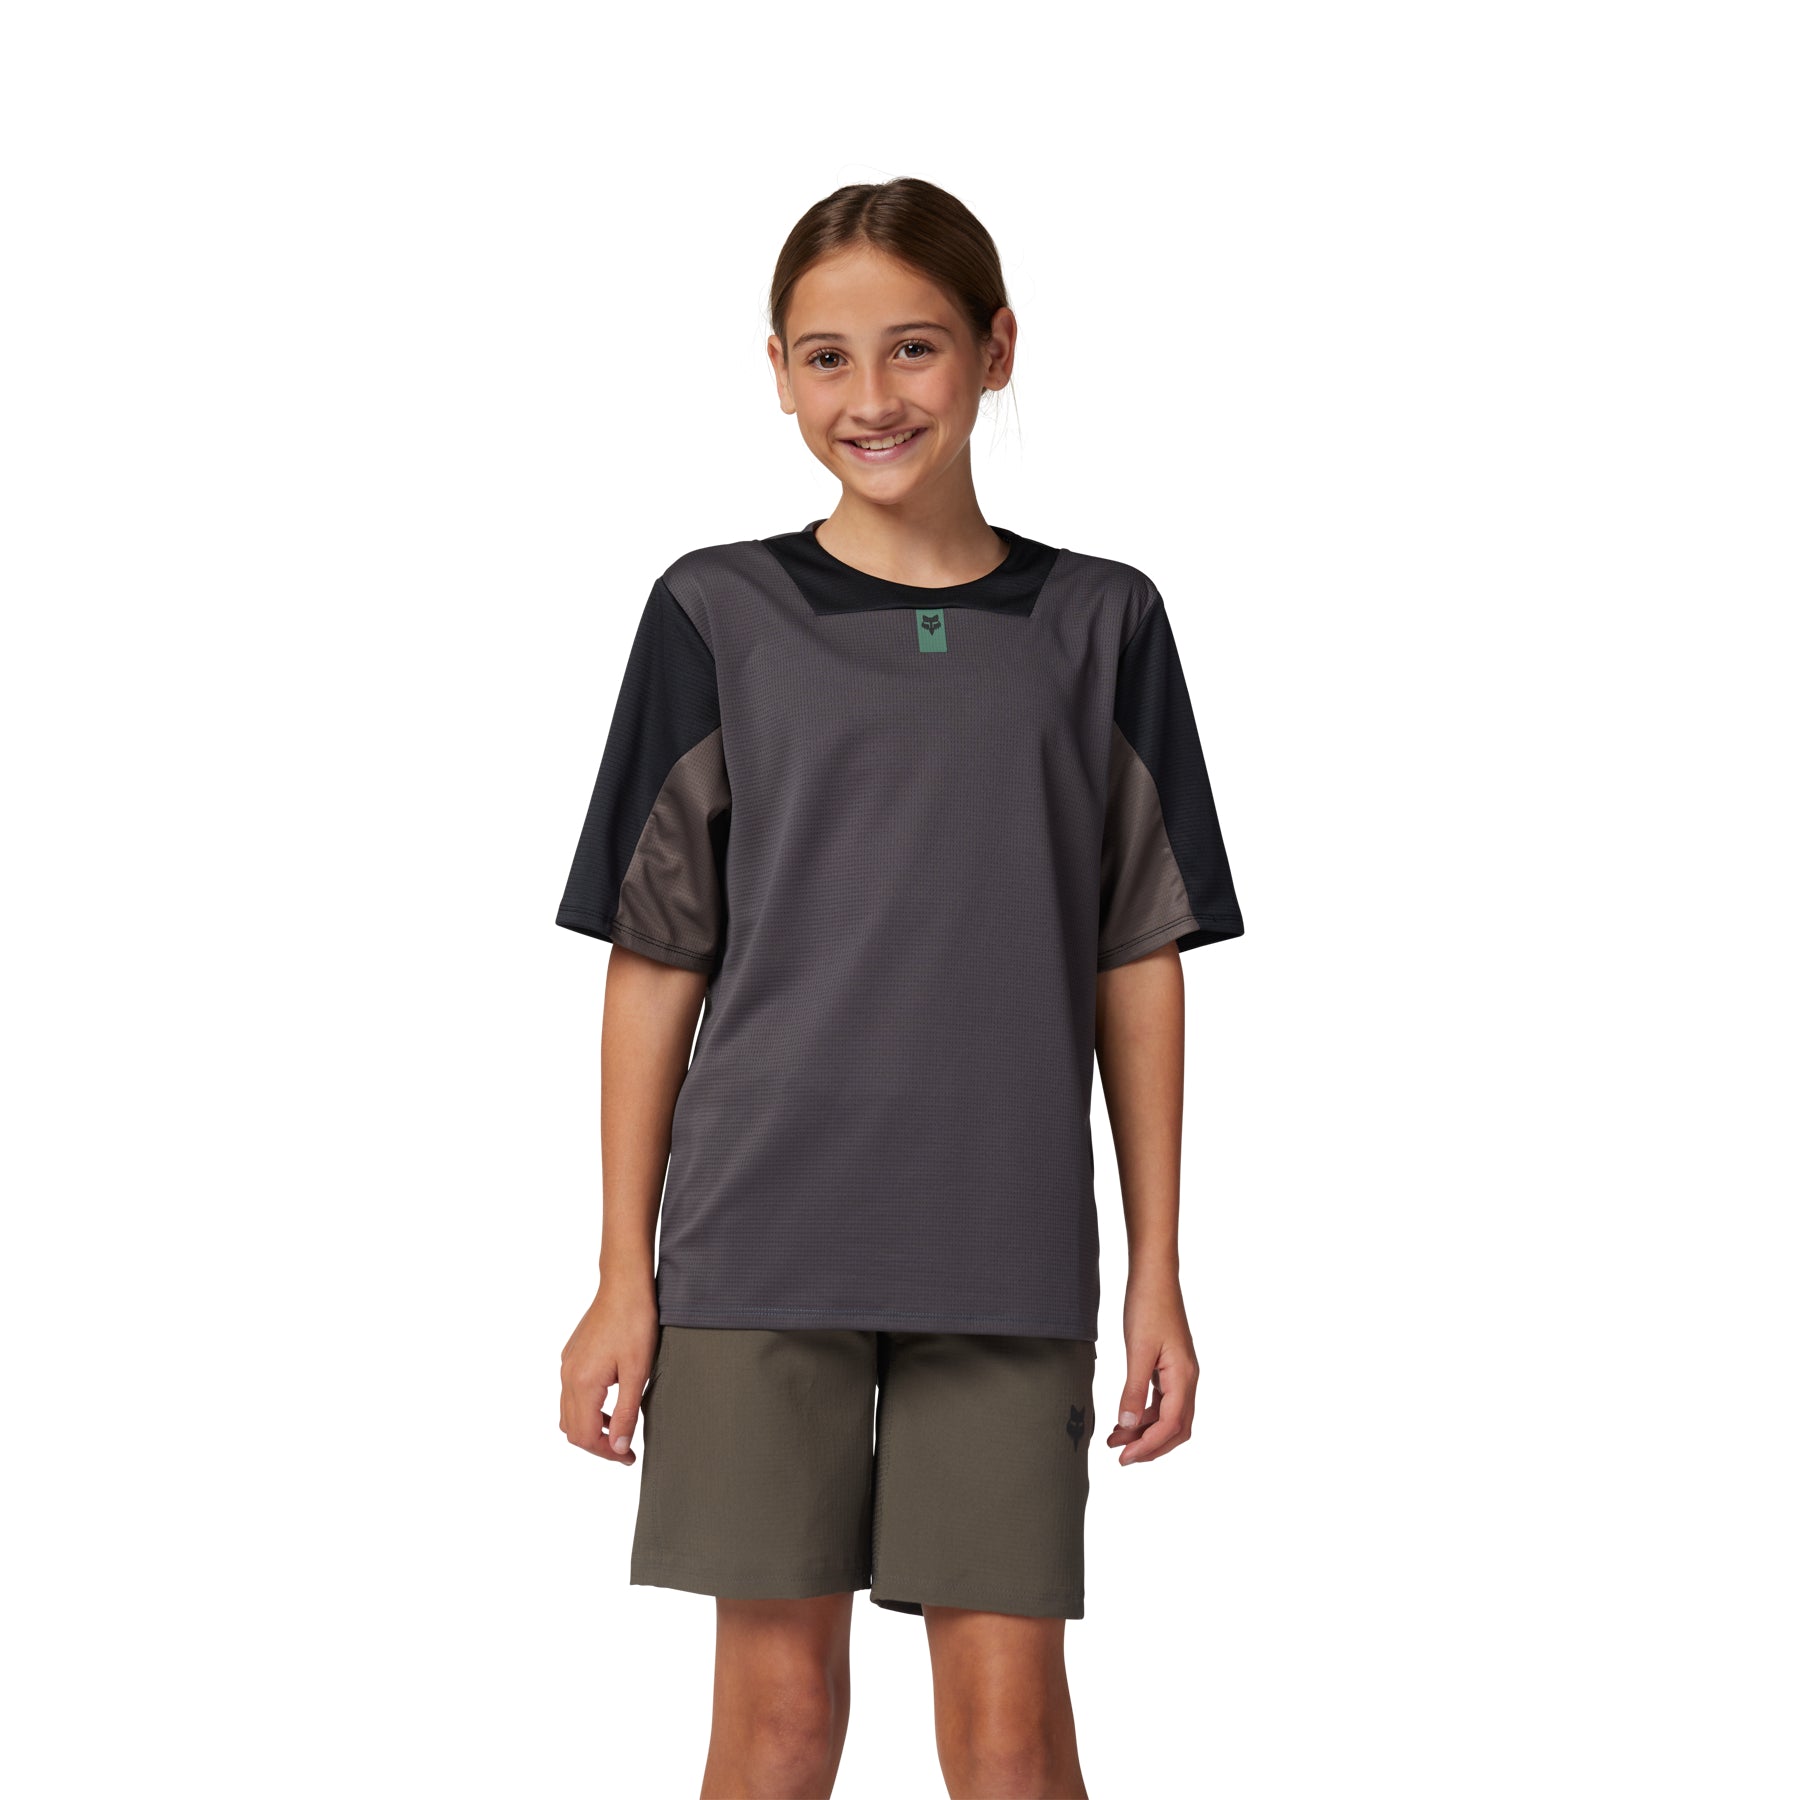 Fox Defend Youth Short Sleeve Jersey - Youth L - Graphite - Image 1